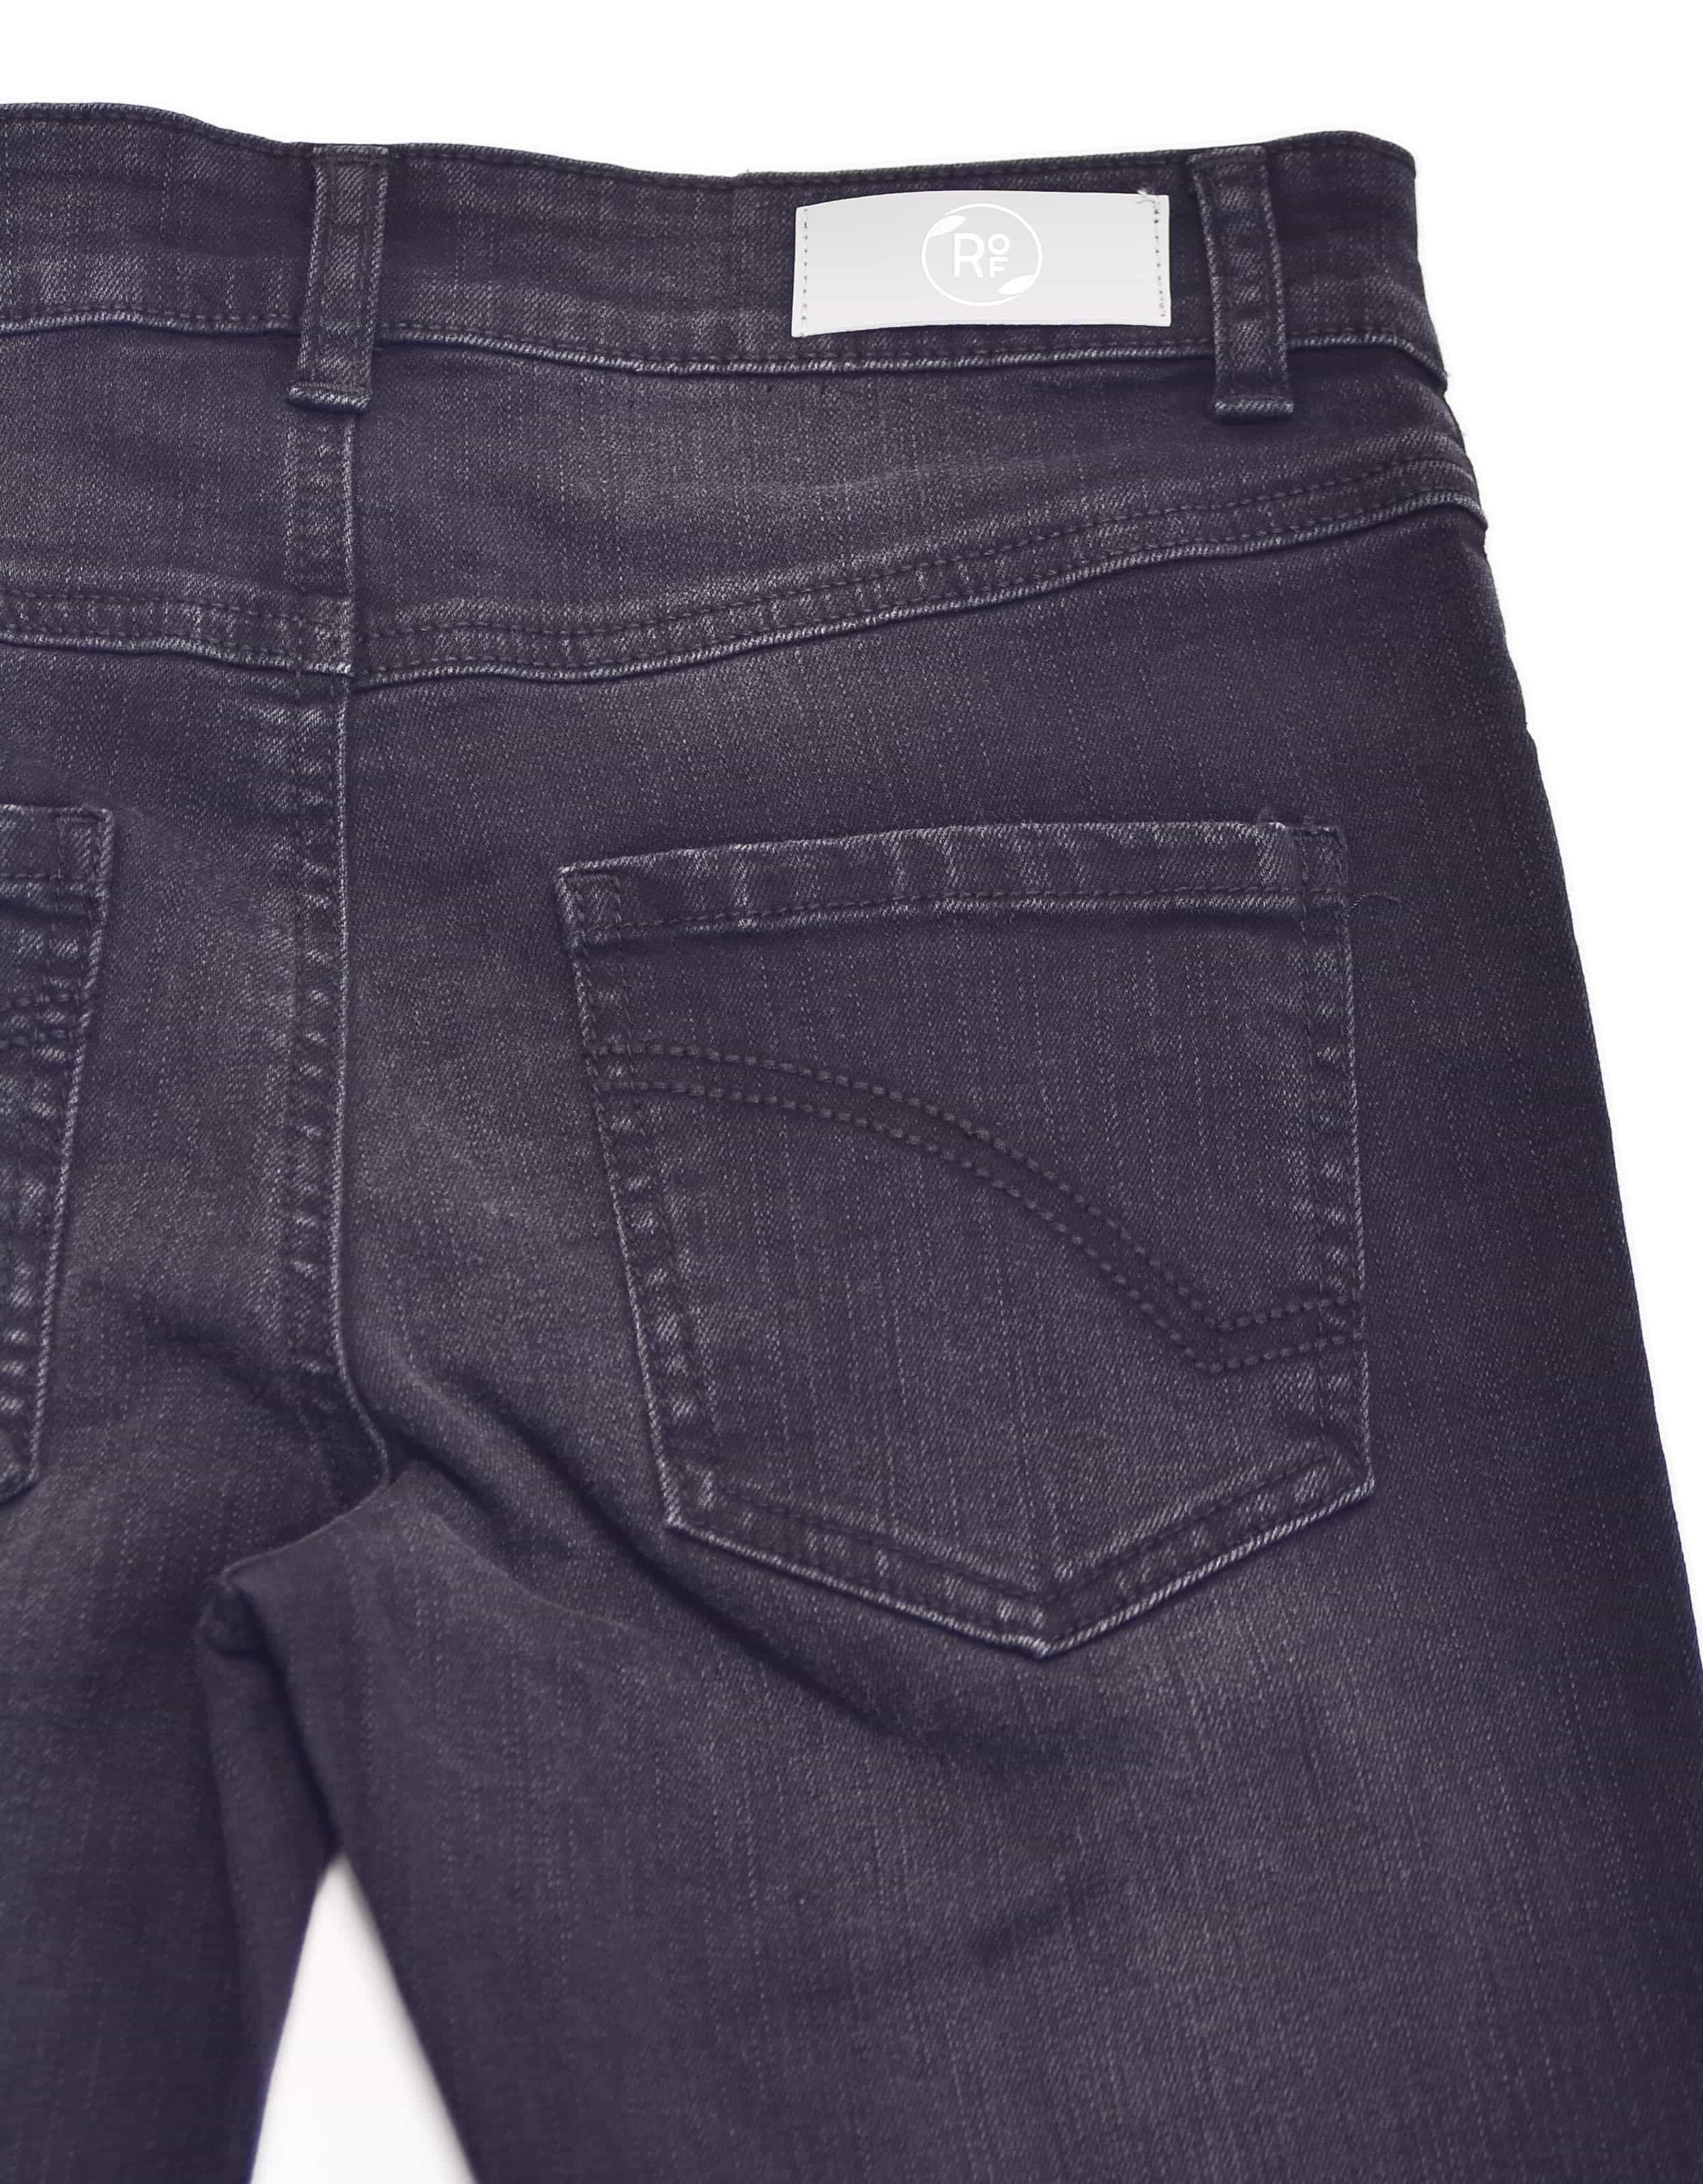 Ring of Fire Boy's Tumble Recycled Fabric Sustainable Denim Skinny Jeans - image 3 of 10